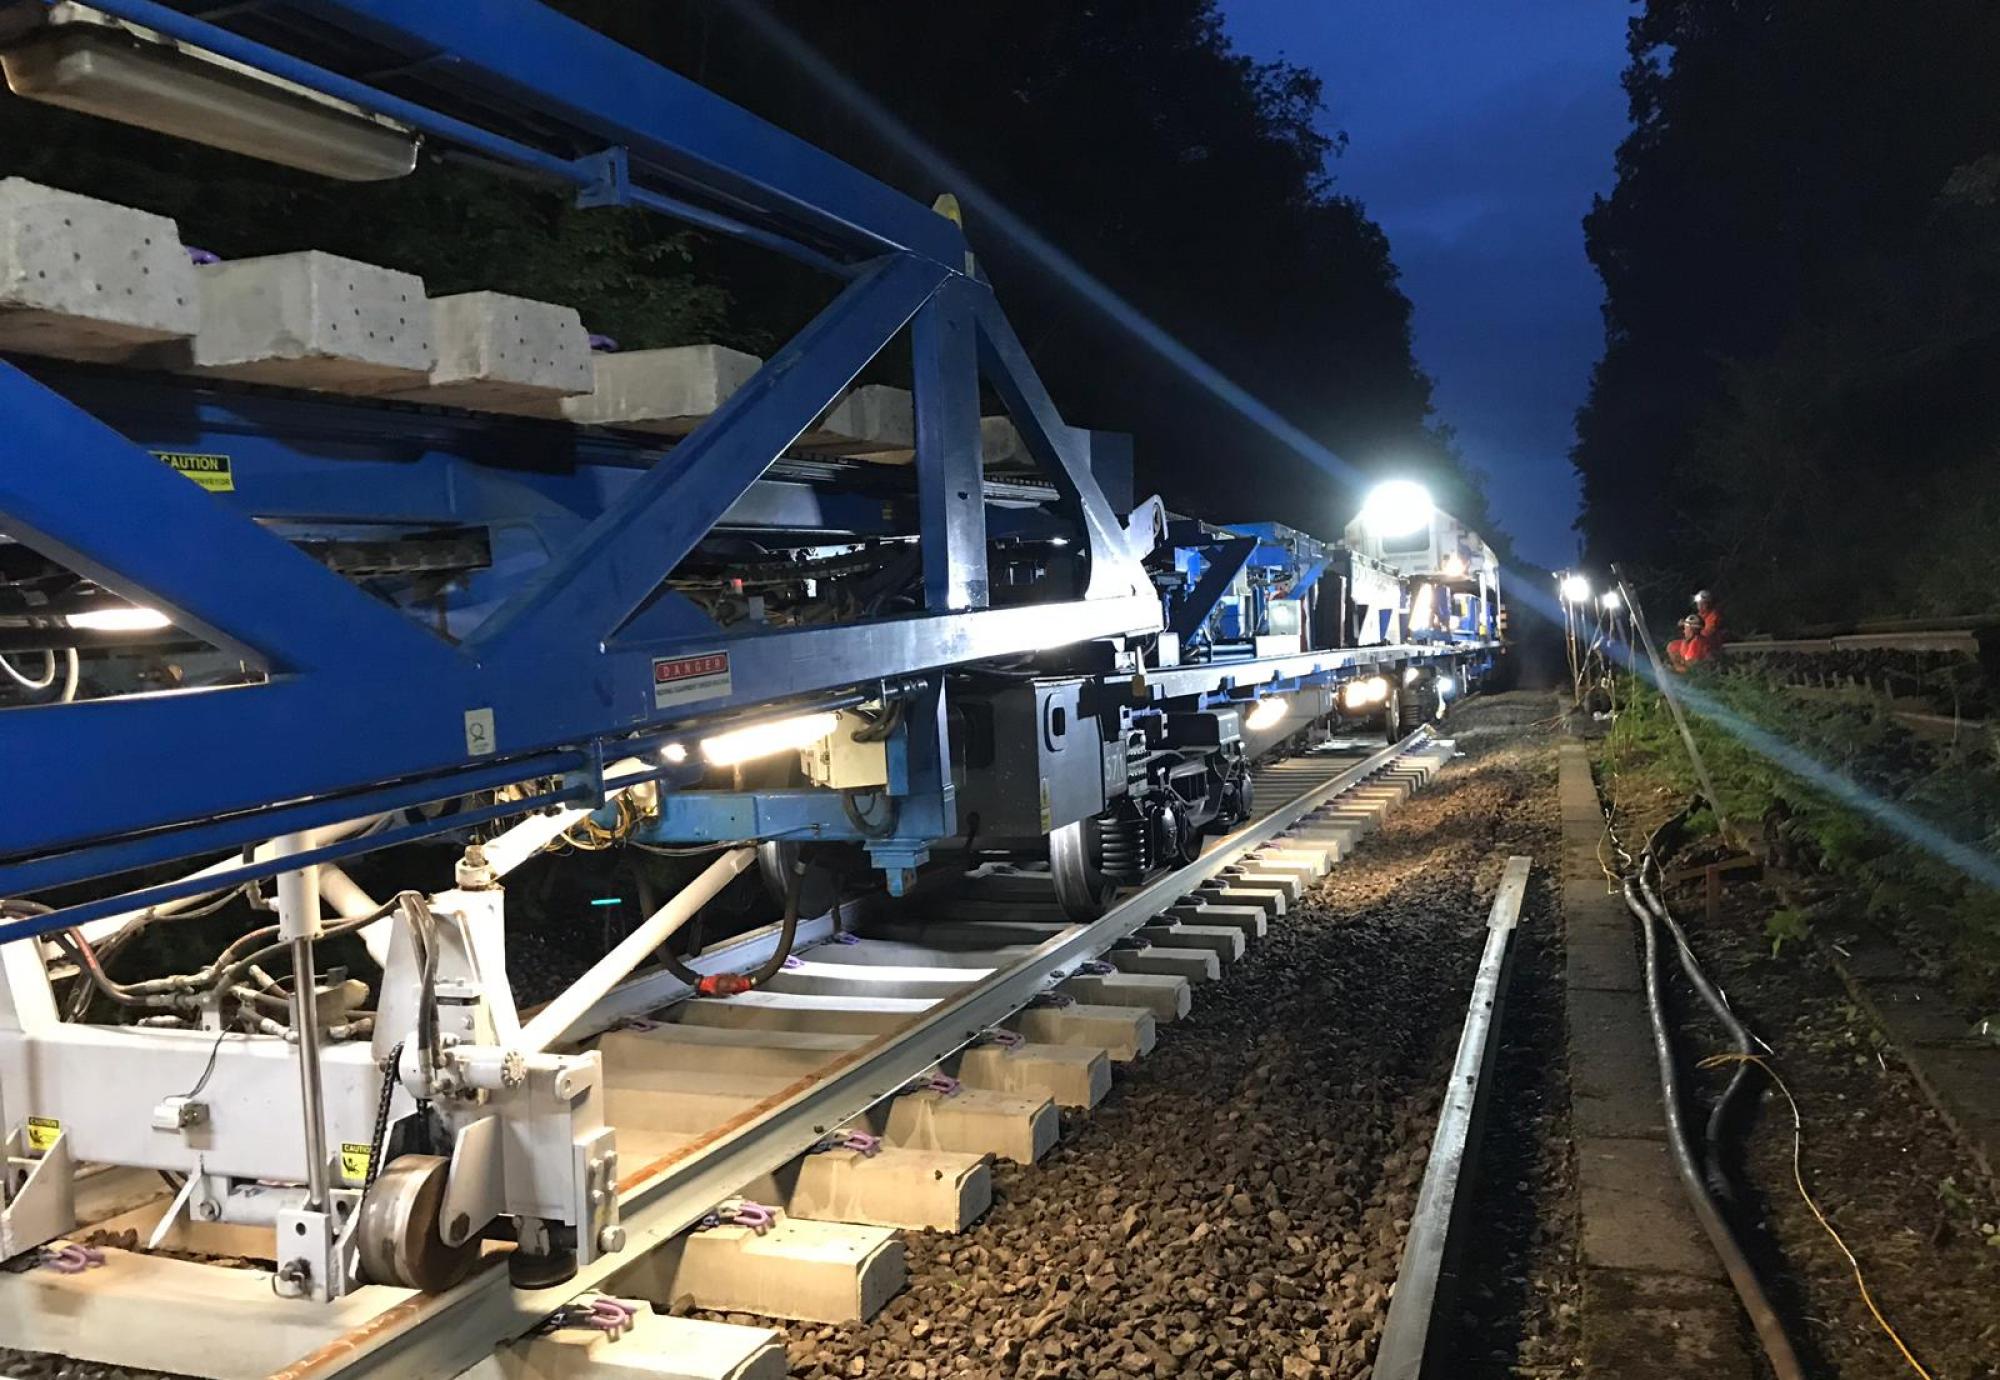 Track renewals taking place at Botley